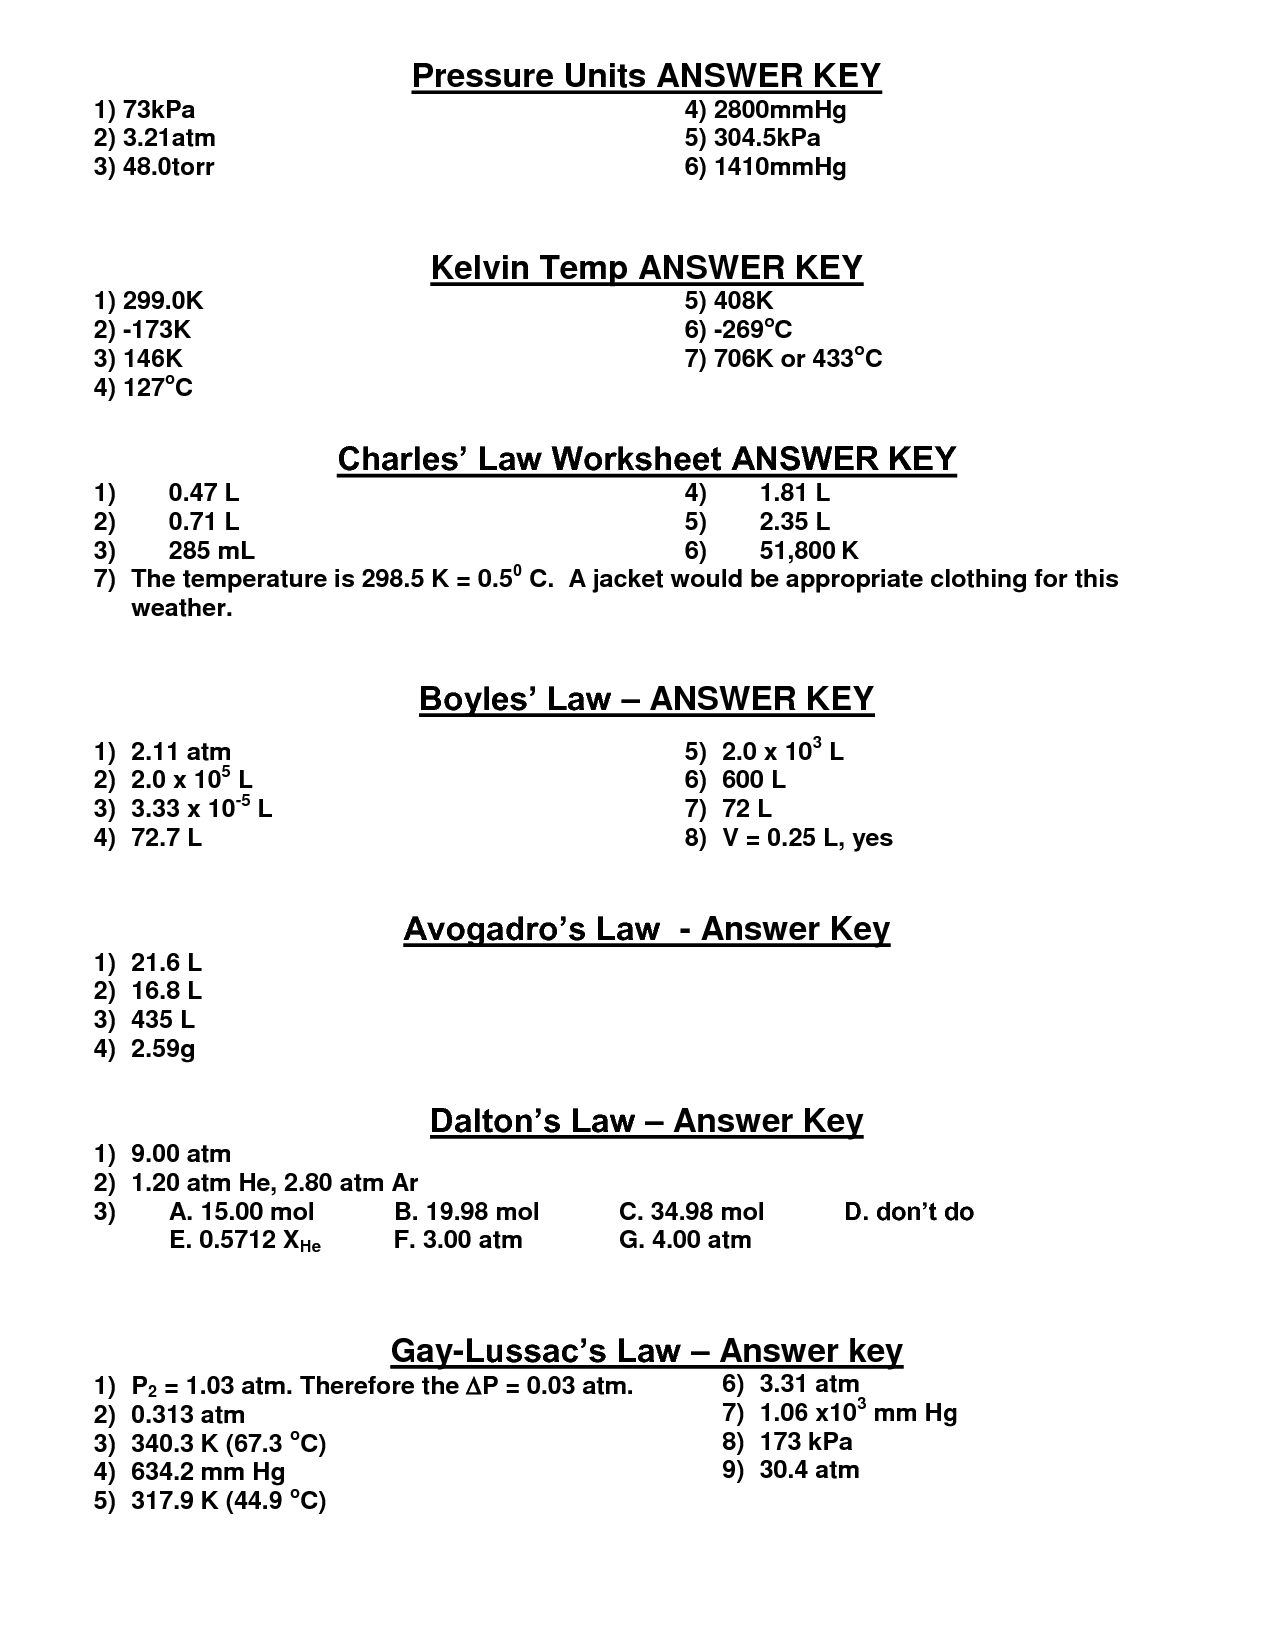 14-best-images-of-boyle-s-law-worksheet-answers-ideal-gas-law-worksheet-answer-key-boyle-s